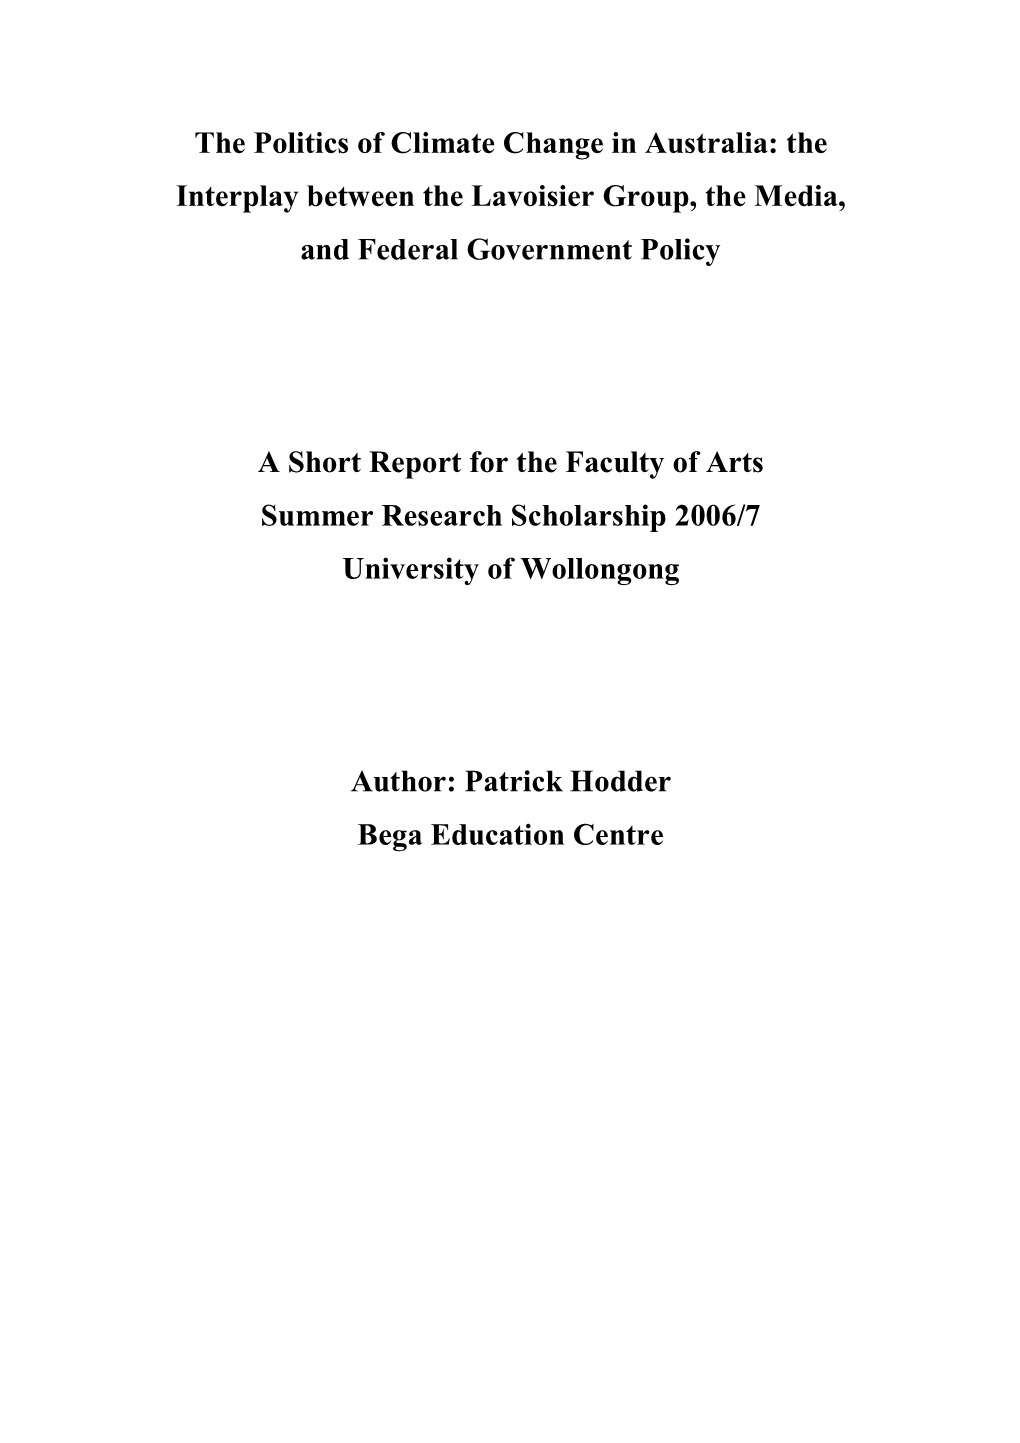 The Politics of Climate Change in Australia: the Interplay Between the Lavoisier Group, the Media, and Federal Government Policy